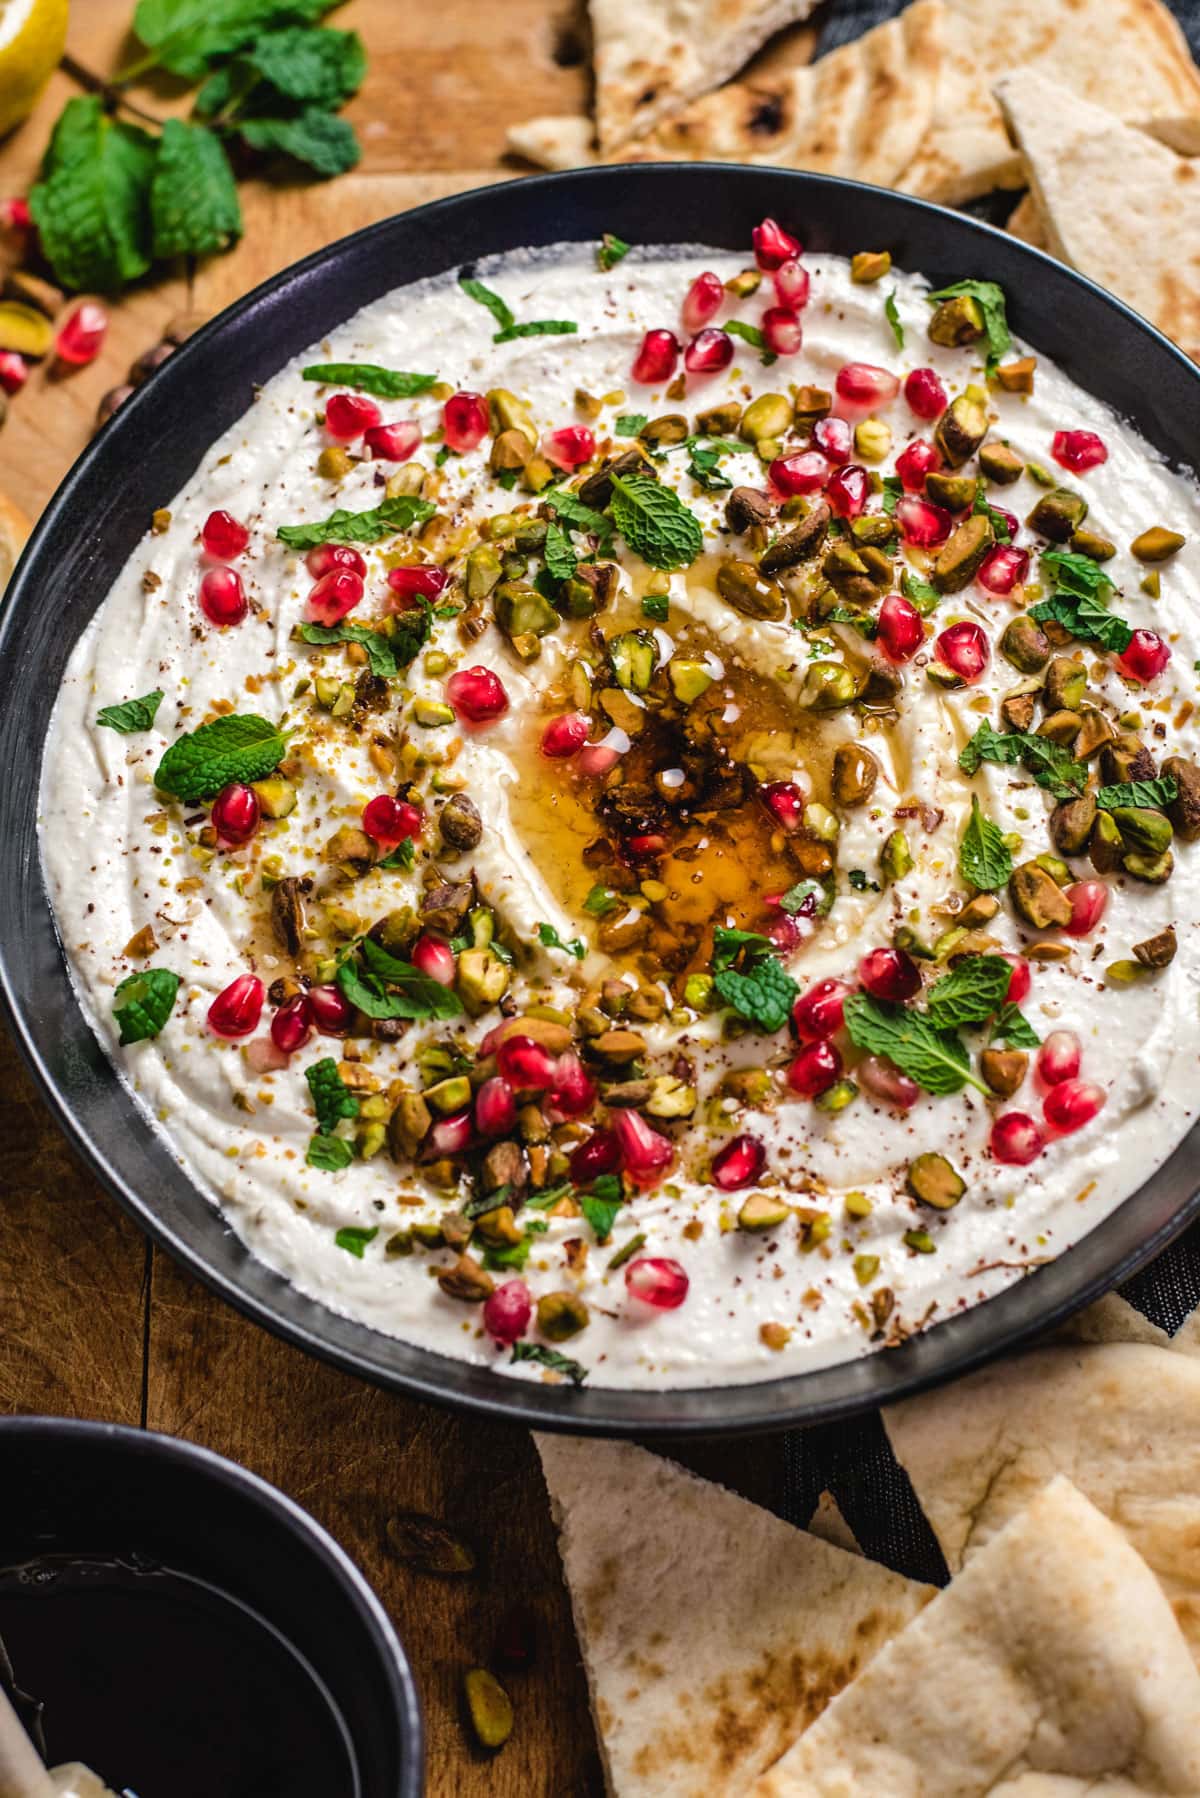 A close-up picture of a bowl of Honey-Whipped Feta Dip. The bowl is black and the dip has been swirled in the bowl and topped with honey, bright red pomegranate seeds, green pistachios, and fresh mint leaves.